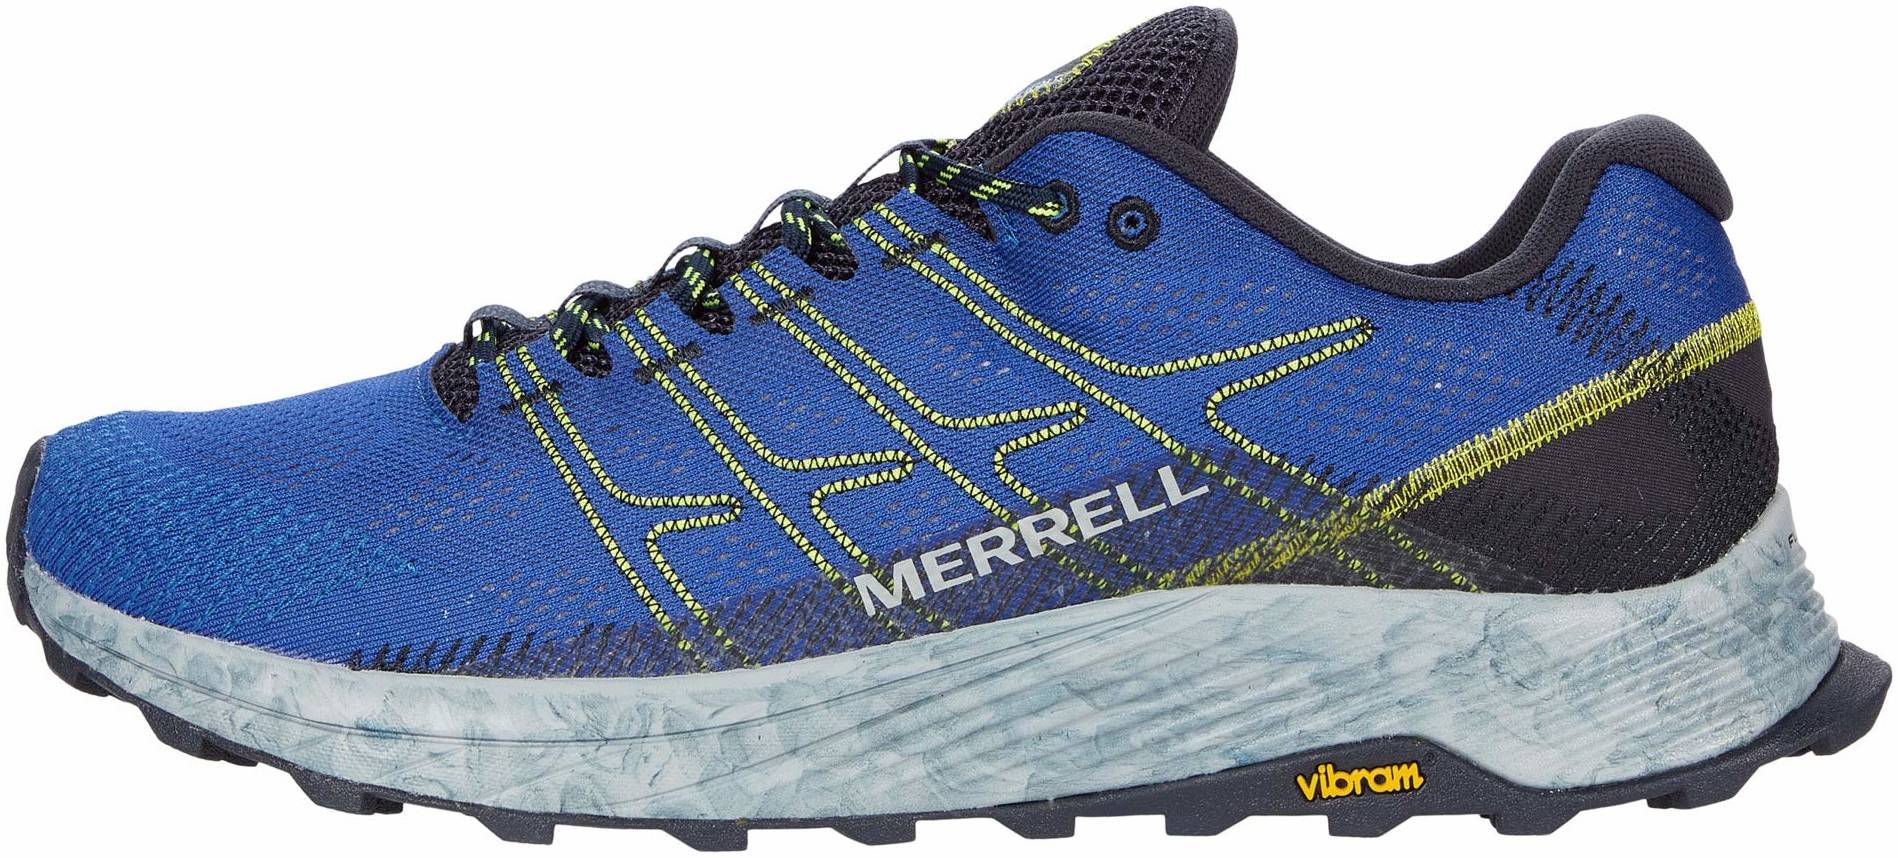 Womens Merrell All Out Peak Lace Trainer light green J35534